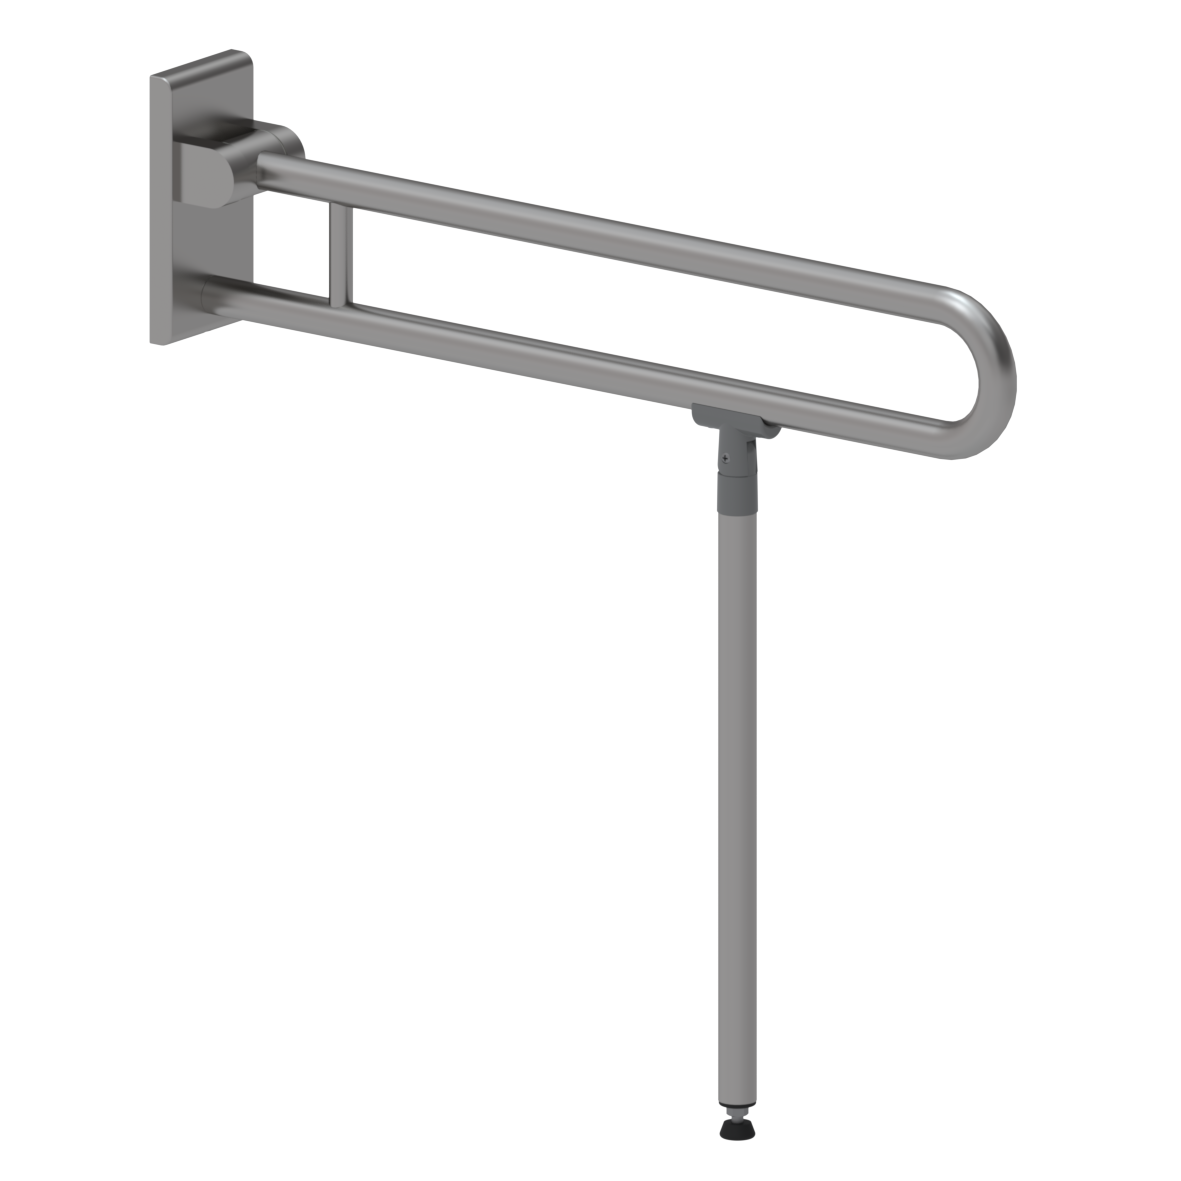 Inox Care Lift-up support rail vario, with base plate, with floor support (750 mm), left and right, L = 850 mm, Stainless steel